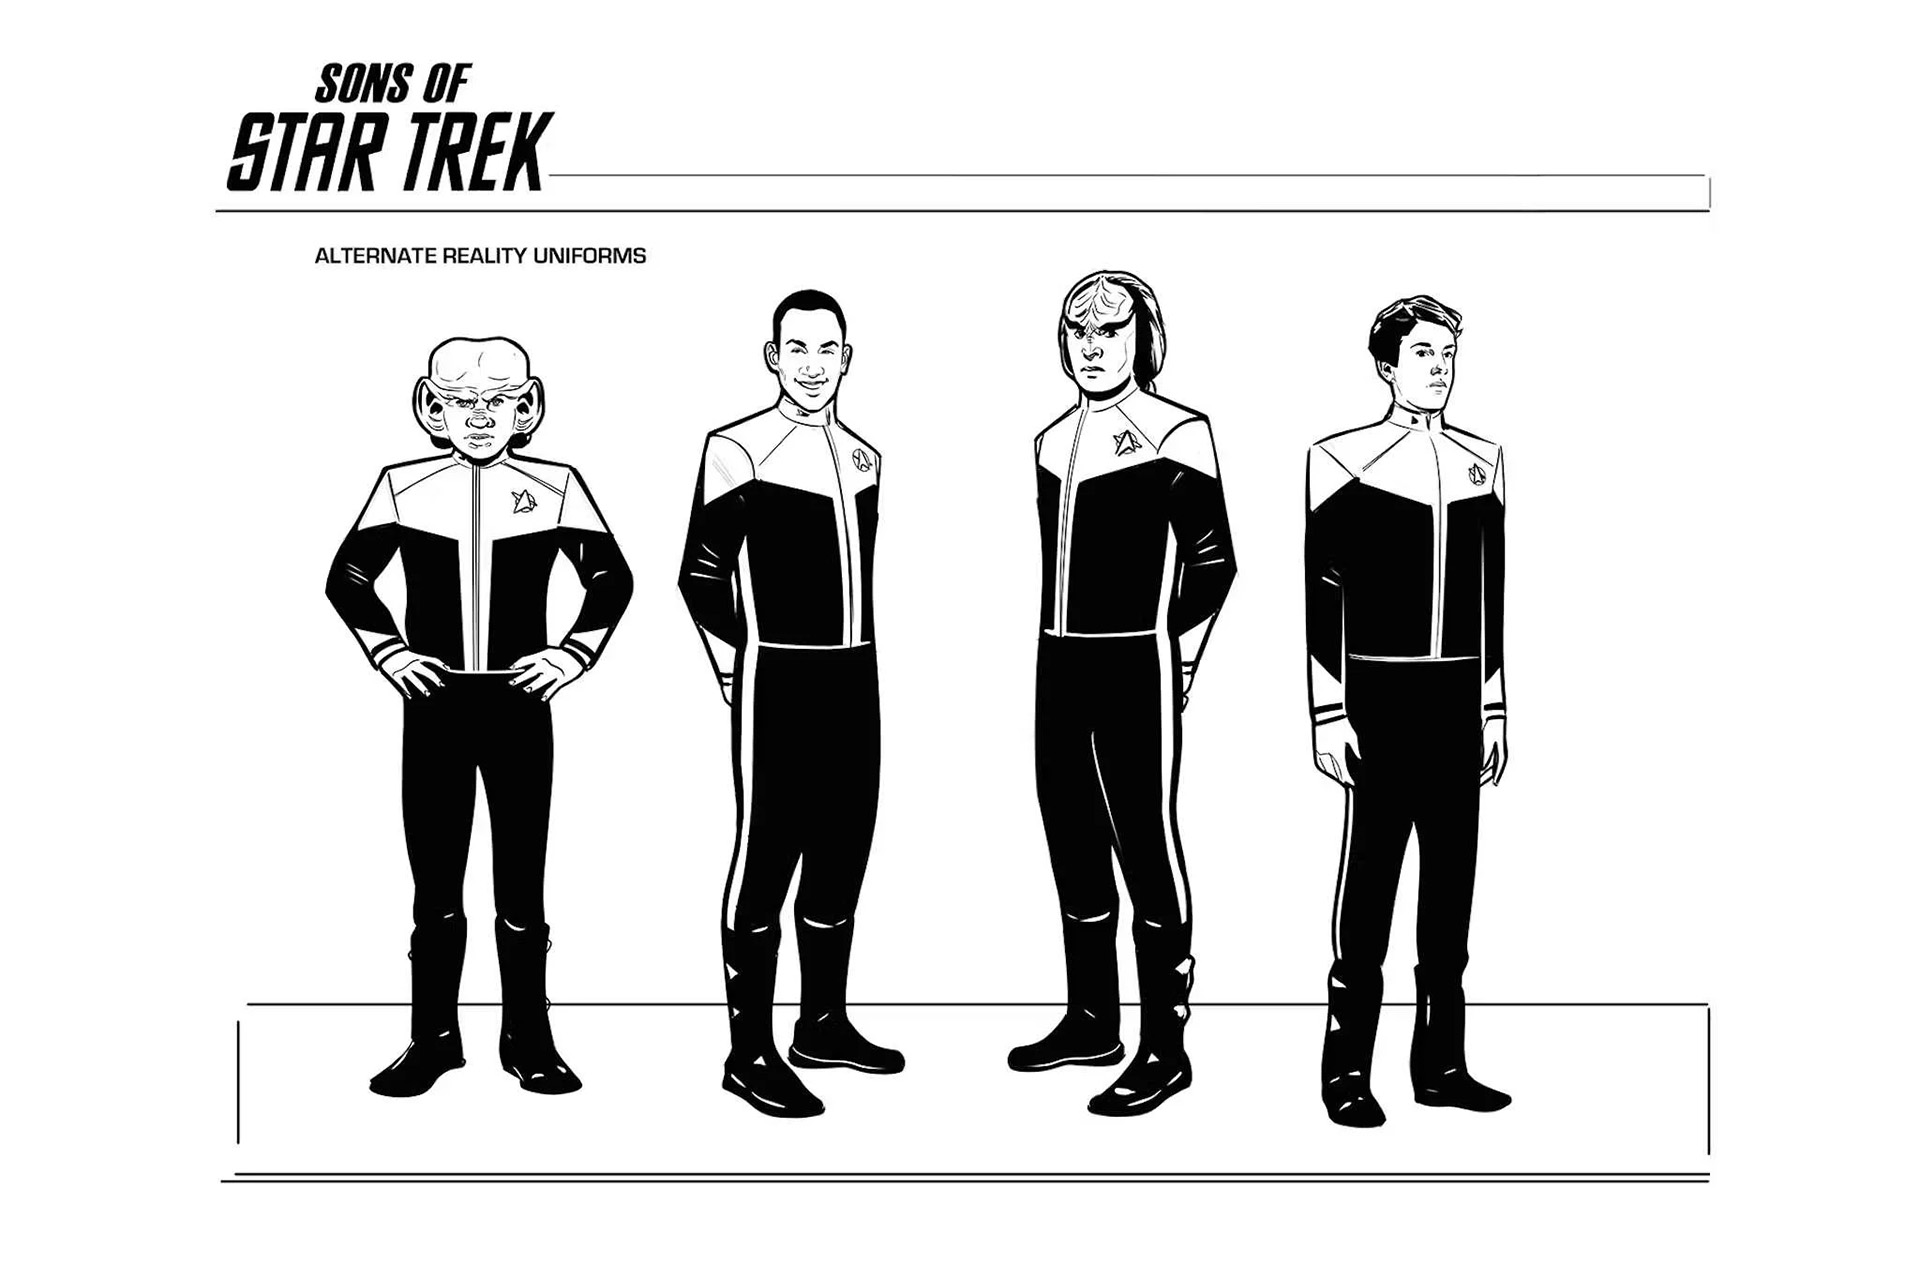 IDW NYCC Panel Reveals First Look At Upcoming Trek Comics, Including New  “Sons Of Star Trek” Miniseries –